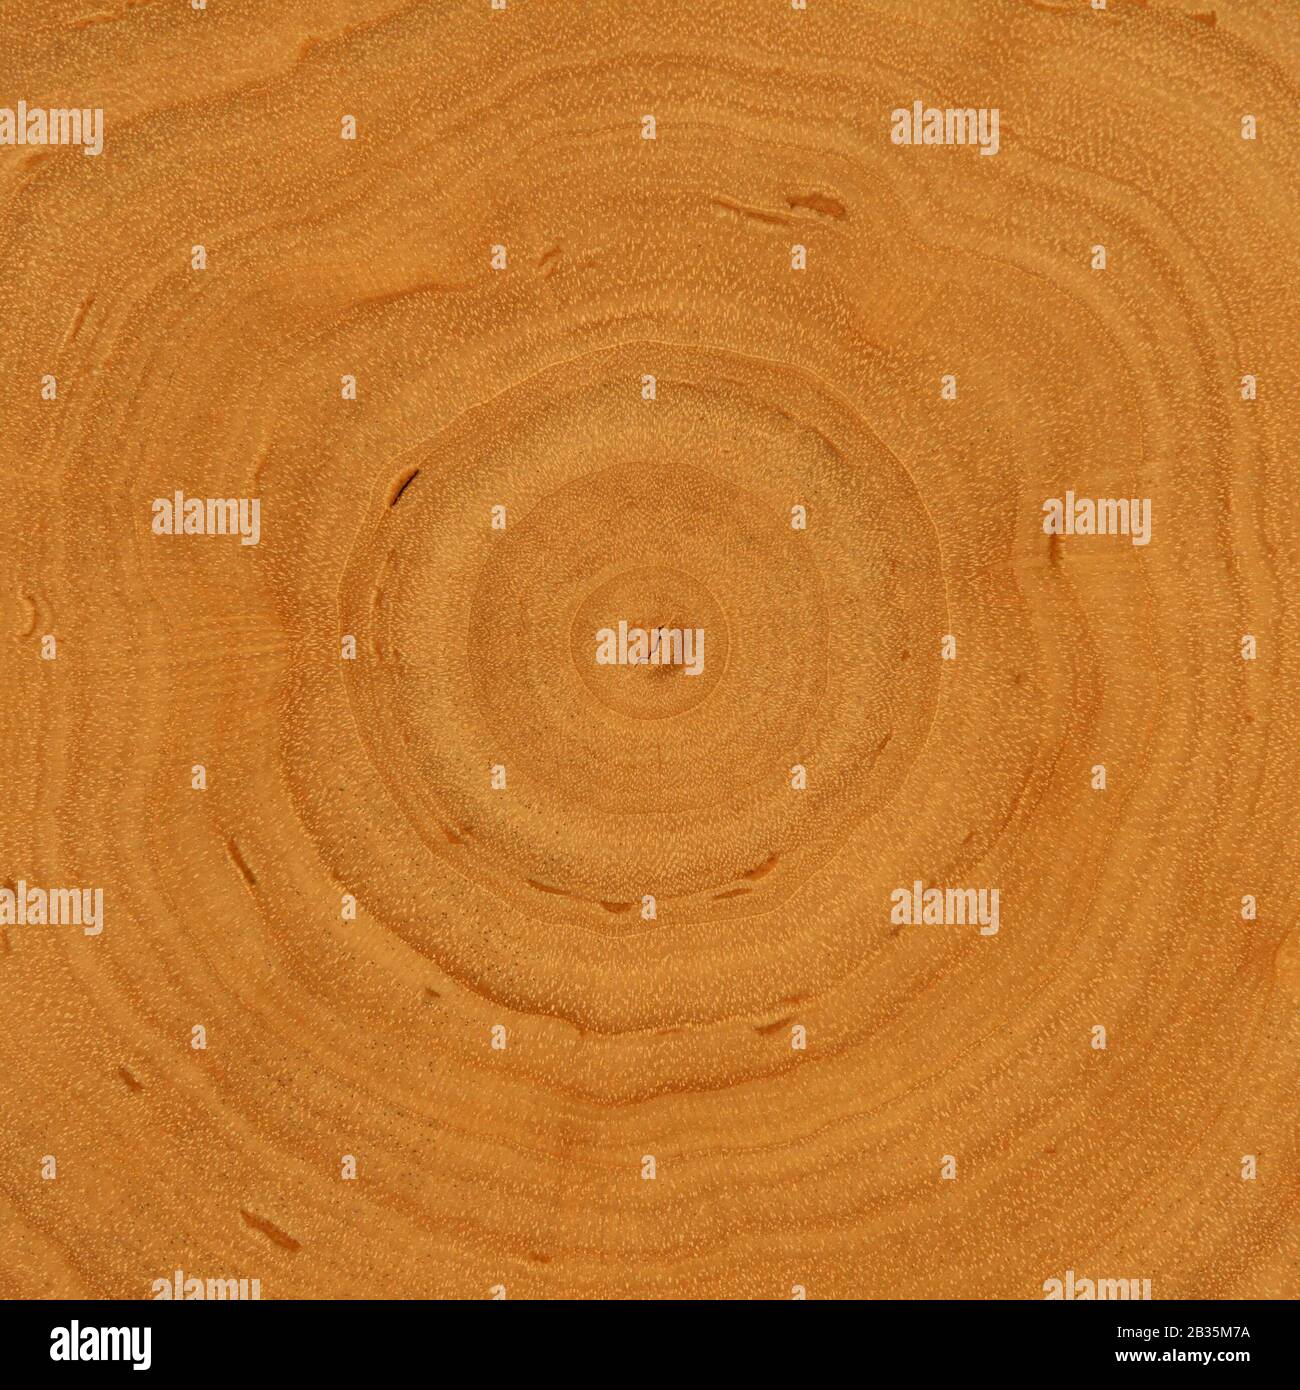 Growth Rings - Wooden Background: tree cross-section with differentiated growth rings Stock Photo